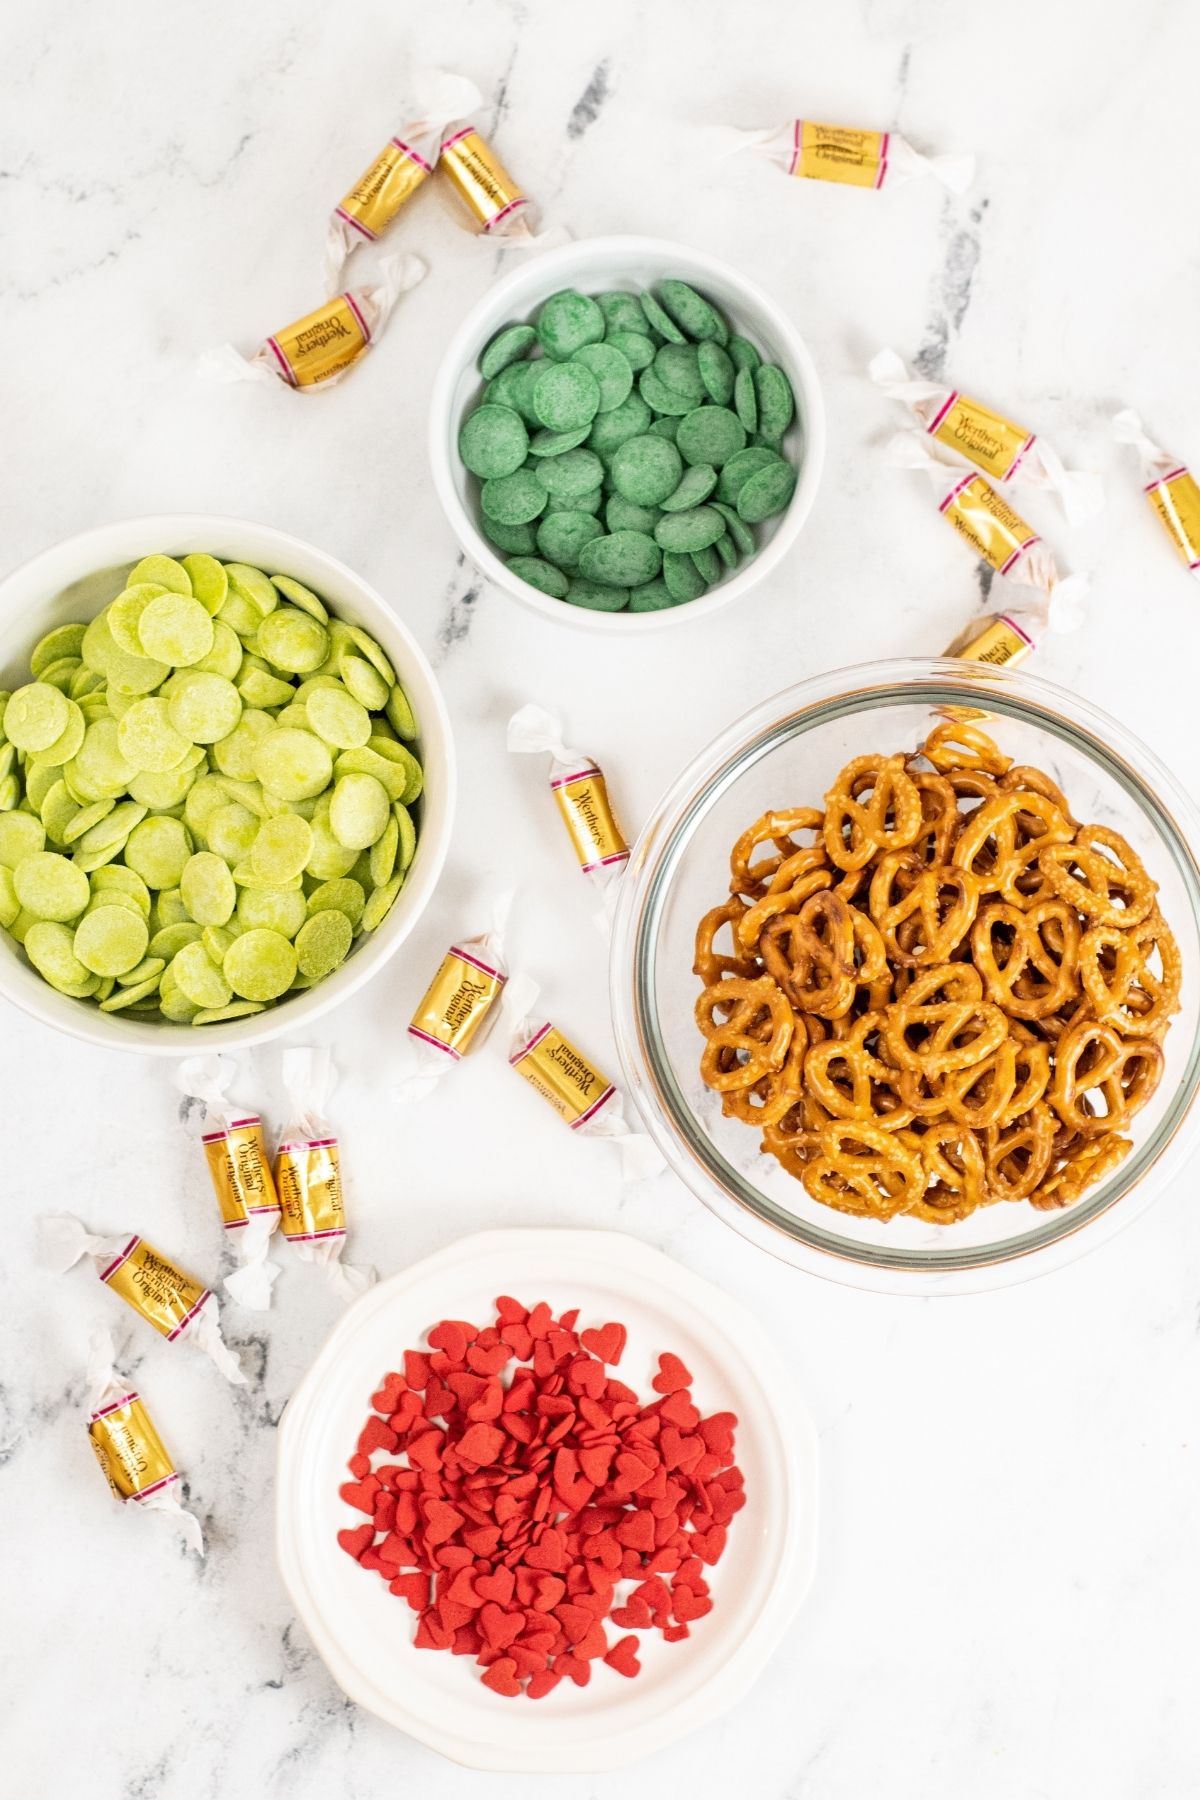 ingredients in bowls on white counter: dark green and light green candy melts, pretzels, red heart sprinkles, caramel candies